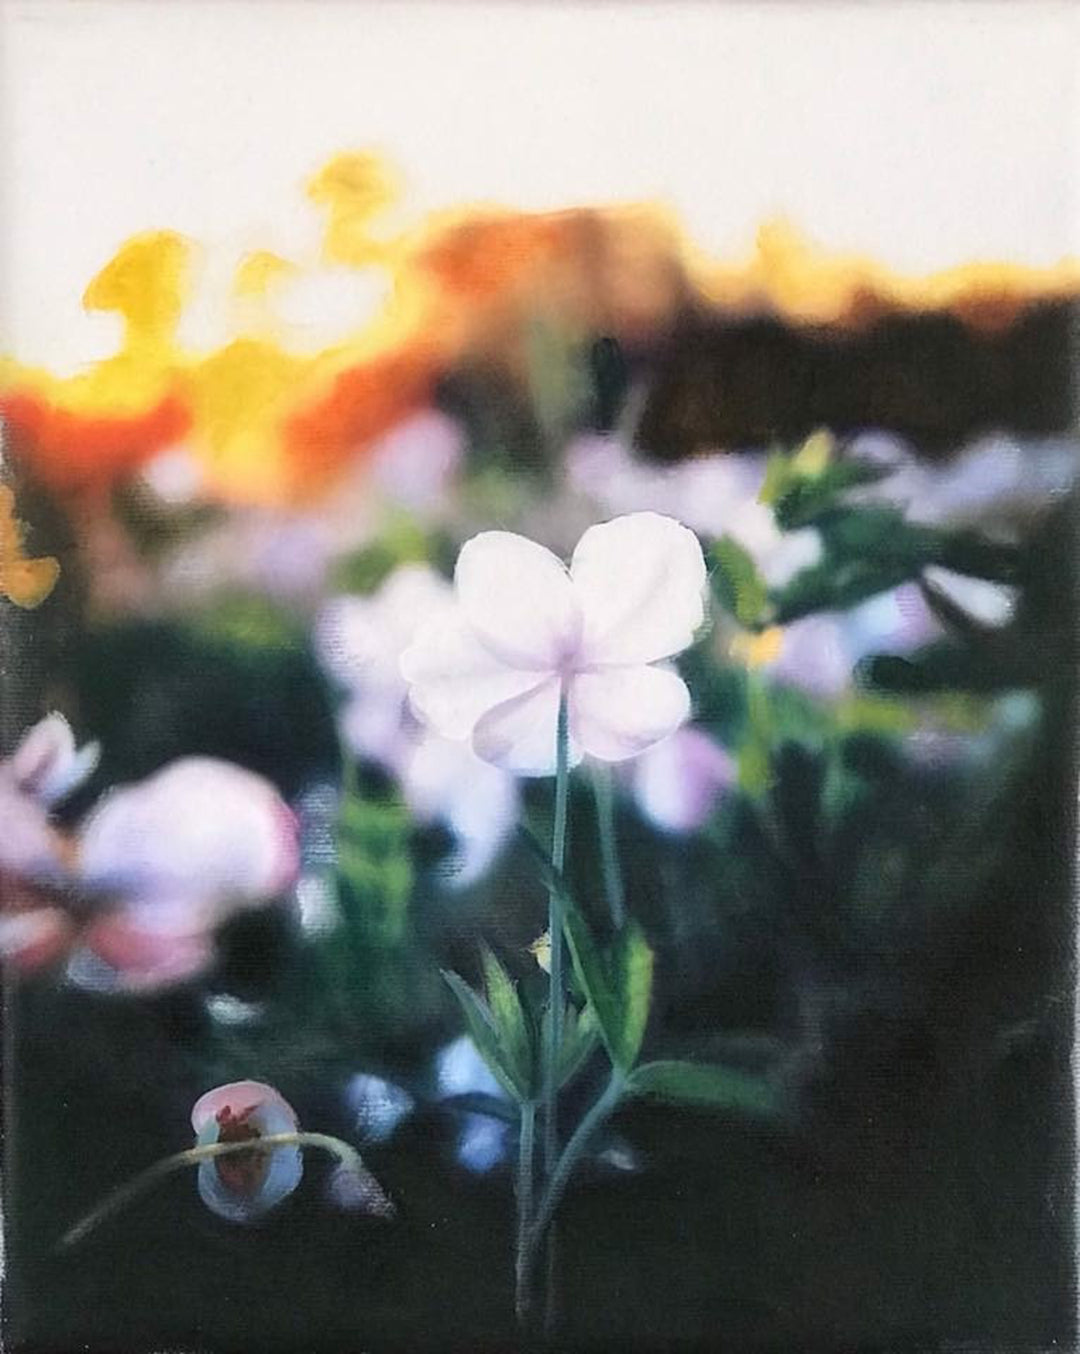 A 10 x 8 inches painting of white flowers at sunset, done in oil on canvas by John Hyland - "I Roam'd From Field to Field" by John Hyland.